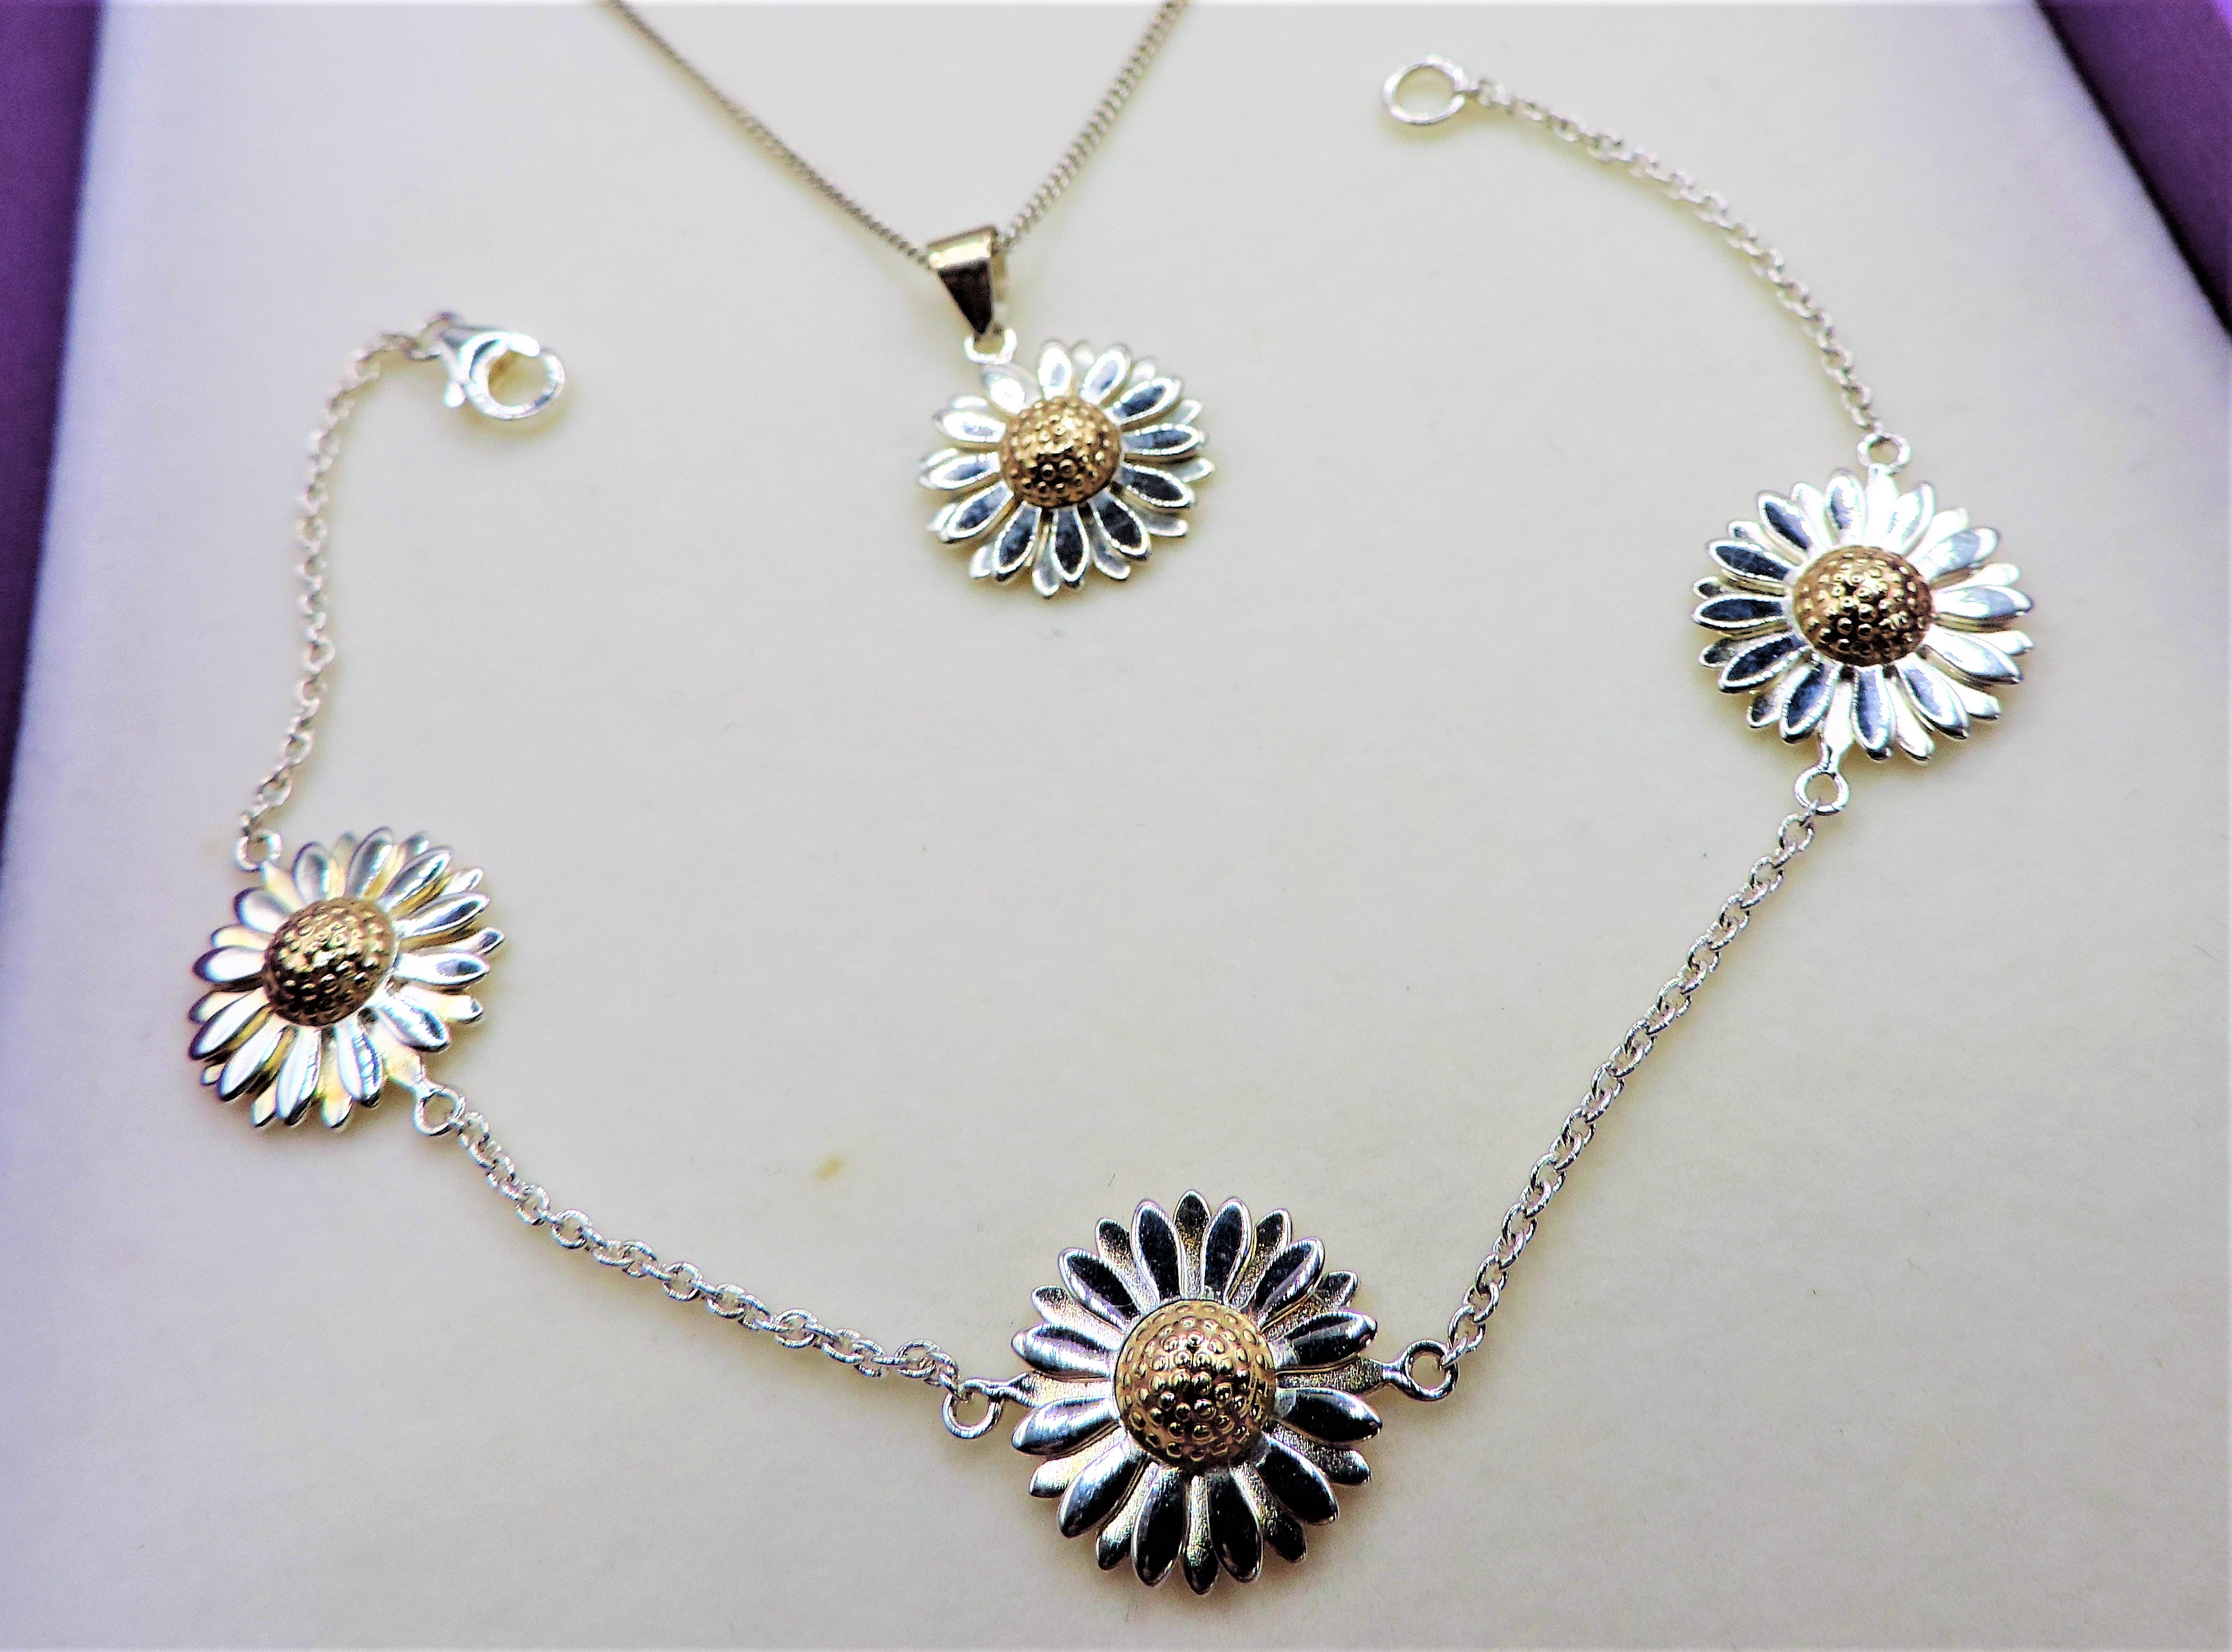 Gold & Sterling Silver Daisy Necklace Bracelet & Earrings Set New with Gift Box - Image 3 of 3